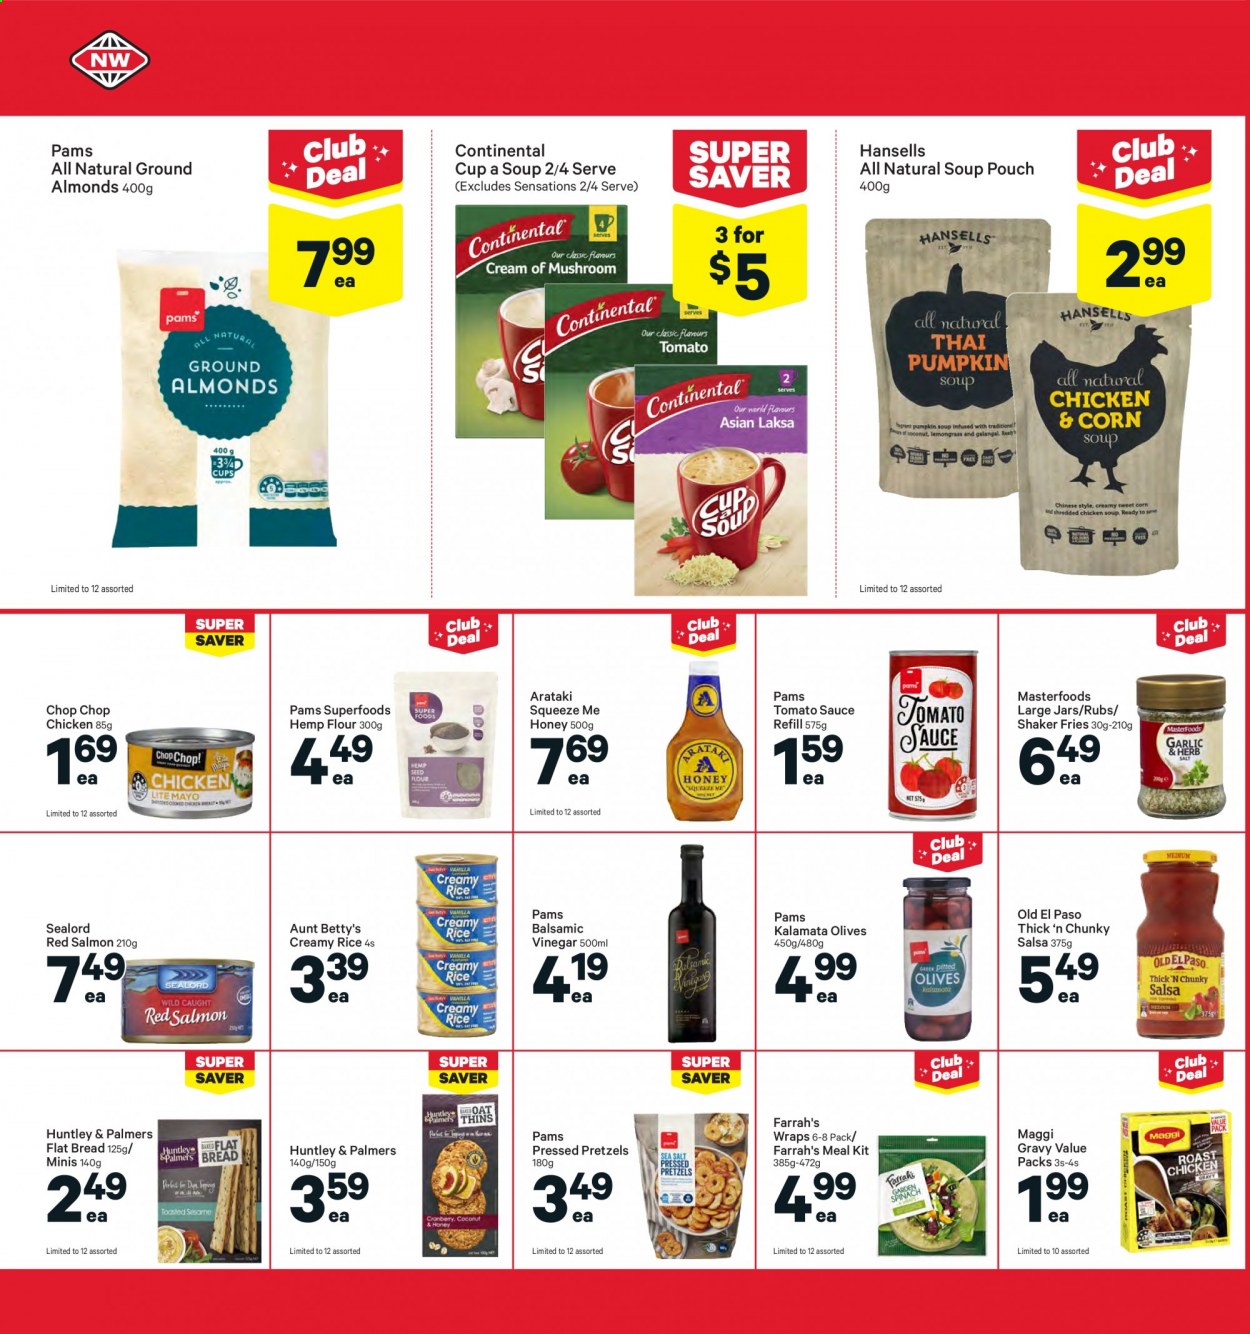 thumbnail - New World mailer - 16.08.2021 - 22.08.2021 - Sales products - bread, pretzels, Old El Paso, wraps, garlic, salmon, Sealord, chicken roast, chicken soup, soup, sauce, Continental, mayonnaise, potato fries, Thins, flour, oats, Maggi, sea salt, tomato sauce, olives, rice, herbs, salsa, vinegar, honey, almonds. Page 16.